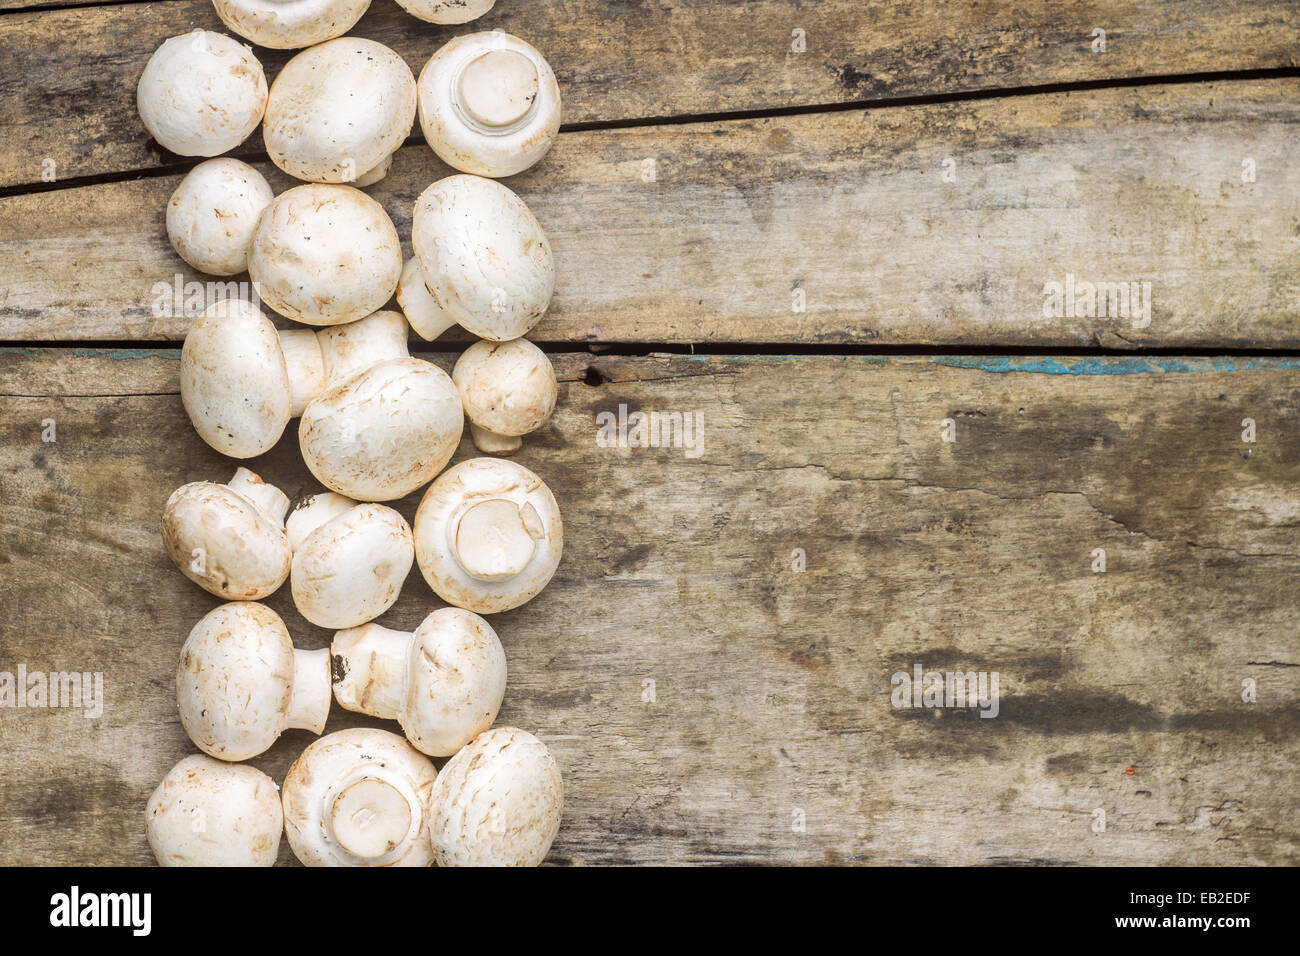 Mushrooms on wooden background. Row of Champignons Stock Photo